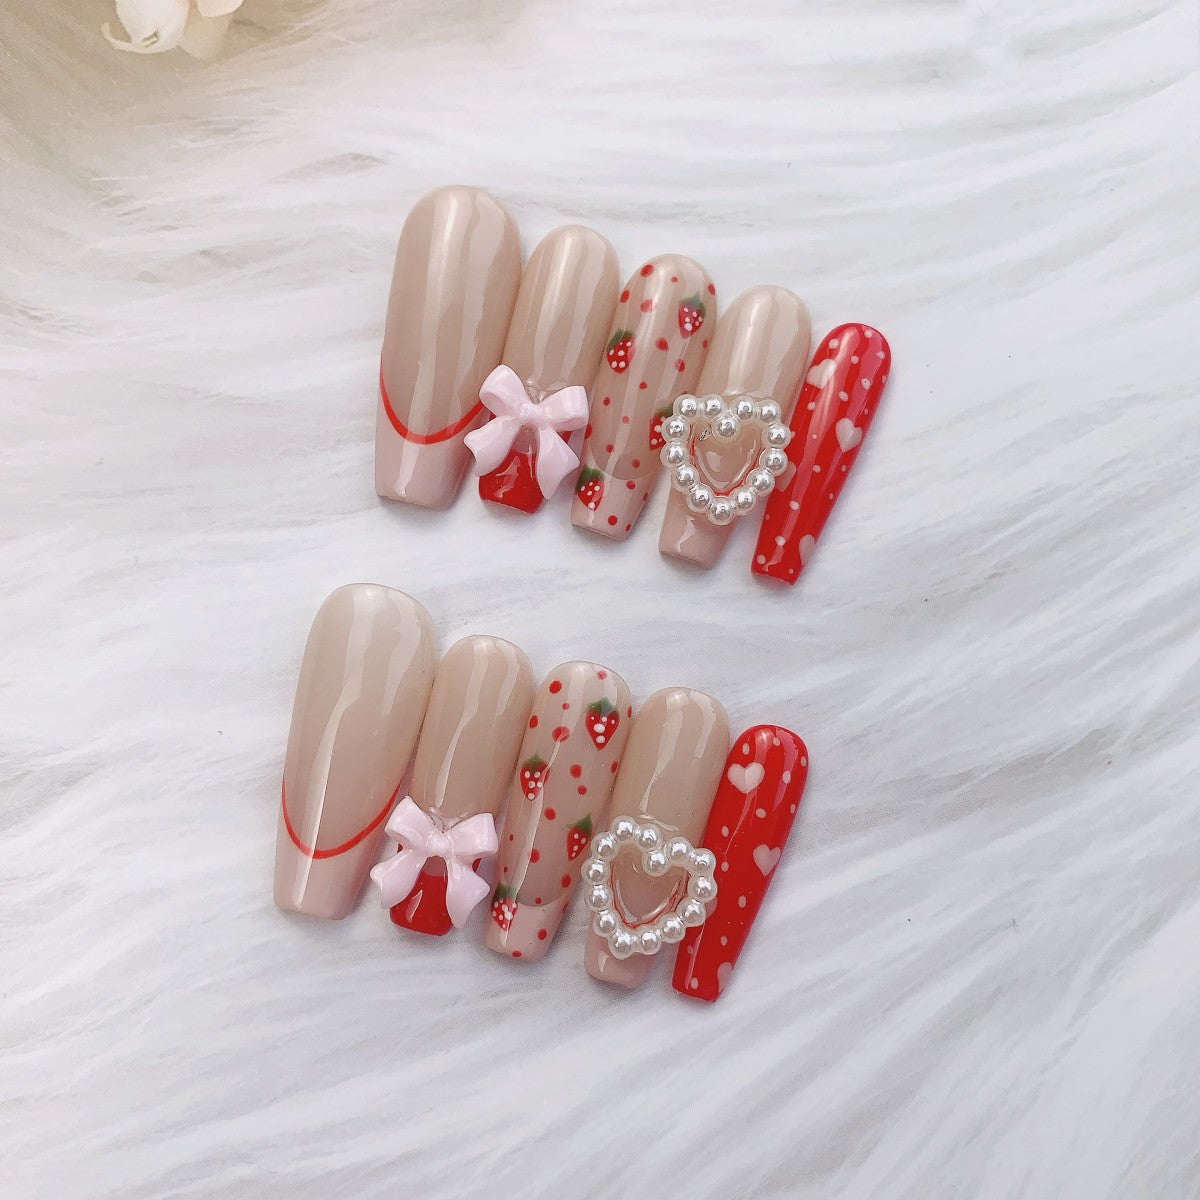 French tip strawberry nail